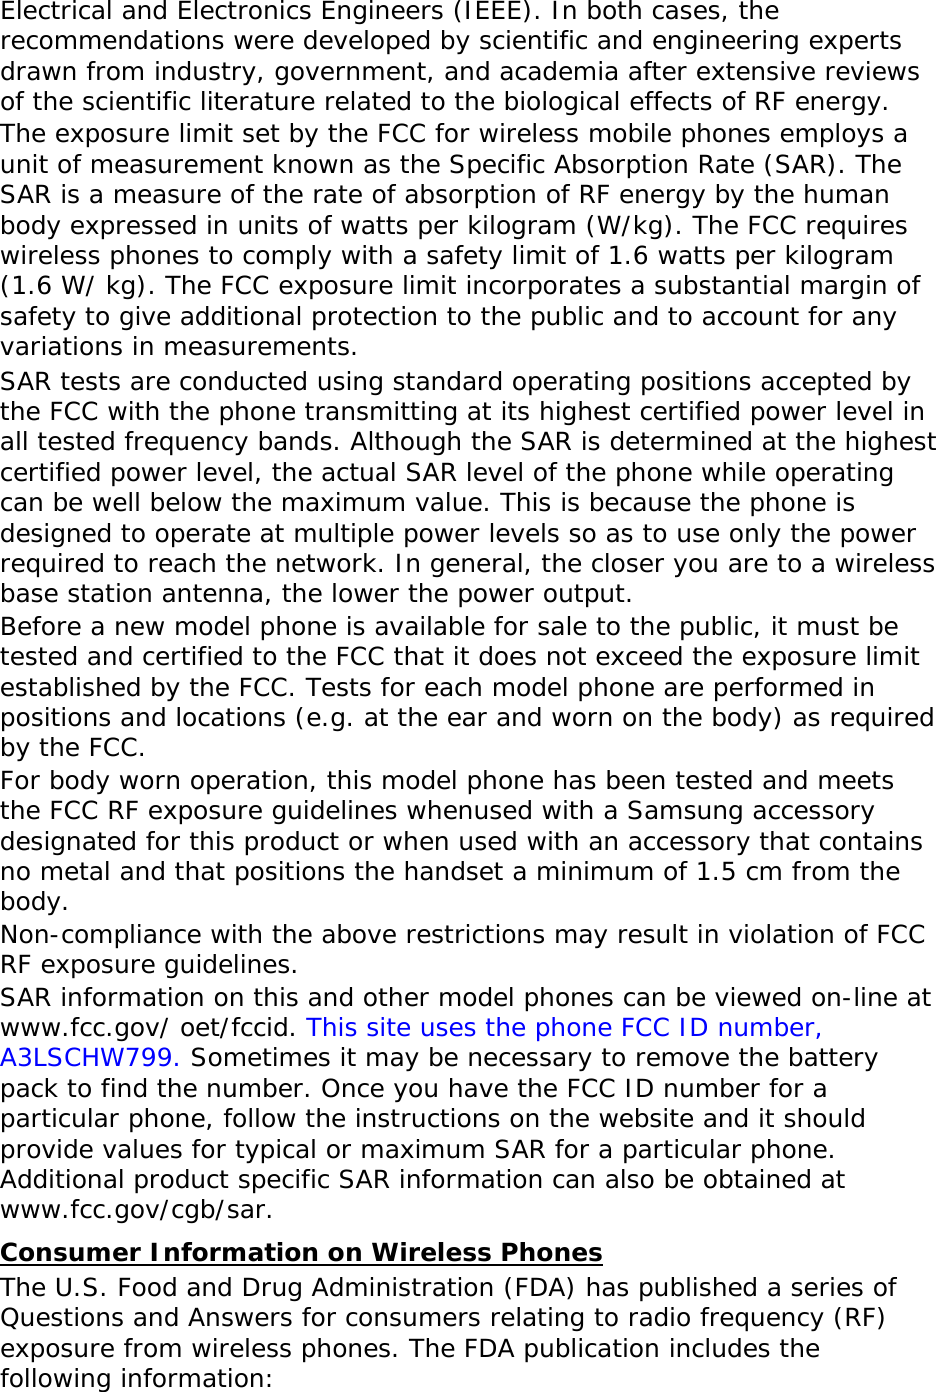 Electrical and Electronics Engineers (IEEE). In both cases, the recommendations were developed by scientific and engineering experts drawn from industry, government, and academia after extensive reviews of the scientific literature related to the biological effects of RF energy. The exposure limit set by the FCC for wireless mobile phones employs a unit of measurement known as the Specific Absorption Rate (SAR). The SAR is a measure of the rate of absorption of RF energy by the human body expressed in units of watts per kilogram (W/kg). The FCC requires wireless phones to comply with a safety limit of 1.6 watts per kilogram (1.6 W/ kg). The FCC exposure limit incorporates a substantial margin of safety to give additional protection to the public and to account for any variations in measurements. SAR tests are conducted using standard operating positions accepted by the FCC with the phone transmitting at its highest certified power level in all tested frequency bands. Although the SAR is determined at the highest certified power level, the actual SAR level of the phone while operating can be well below the maximum value. This is because the phone is designed to operate at multiple power levels so as to use only the power required to reach the network. In general, the closer you are to a wireless base station antenna, the lower the power output. Before a new model phone is available for sale to the public, it must be tested and certified to the FCC that it does not exceed the exposure limit established by the FCC. Tests for each model phone are performed in positions and locations (e.g. at the ear and worn on the body) as required by the FCC.   For body worn operation, this model phone has been tested and meets the FCC RF exposure guidelines whenused with a Samsung accessory designated for this product or when used with an accessory that contains no metal and that positions the handset a minimum of 1.5 cm from the body.  Non-compliance with the above restrictions may result in violation of FCC RF exposure guidelines. SAR information on this and other model phones can be viewed on-line at www.fcc.gov/ oet/fccid. This site uses the phone FCC ID number, A3LSCHW799. Sometimes it may be necessary to remove the battery pack to find the number. Once you have the FCC ID number for a particular phone, follow the instructions on the website and it should provide values for typical or maximum SAR for a particular phone. Additional product specific SAR information can also be obtained at www.fcc.gov/cgb/sar. Consumer Information on Wireless Phones The U.S. Food and Drug Administration (FDA) has published a series of Questions and Answers for consumers relating to radio frequency (RF) exposure from wireless phones. The FDA publication includes the following information: 